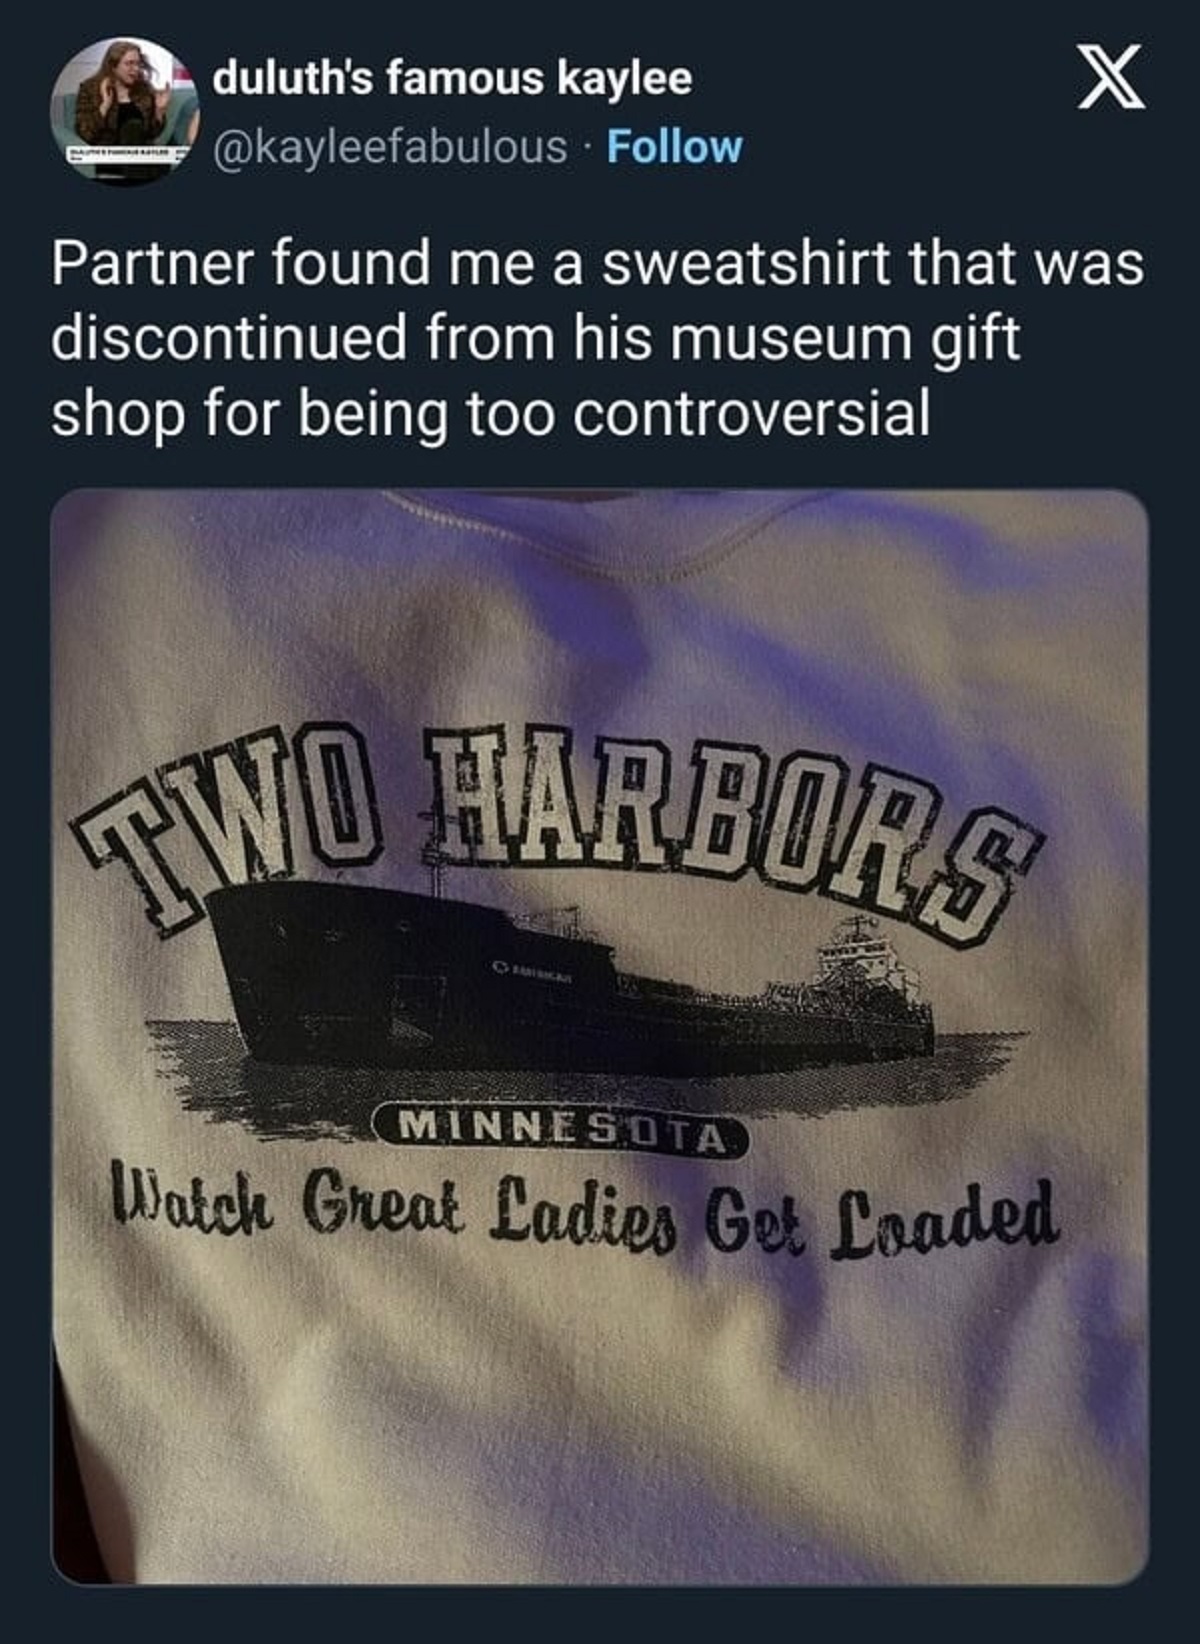 poster - duluth's famous kaylee X Partner found me a sweatshirt that was discontinued from his museum gift shop for being too controversial Two Harbors Minnesota Watch Great Ladies Get Loaded